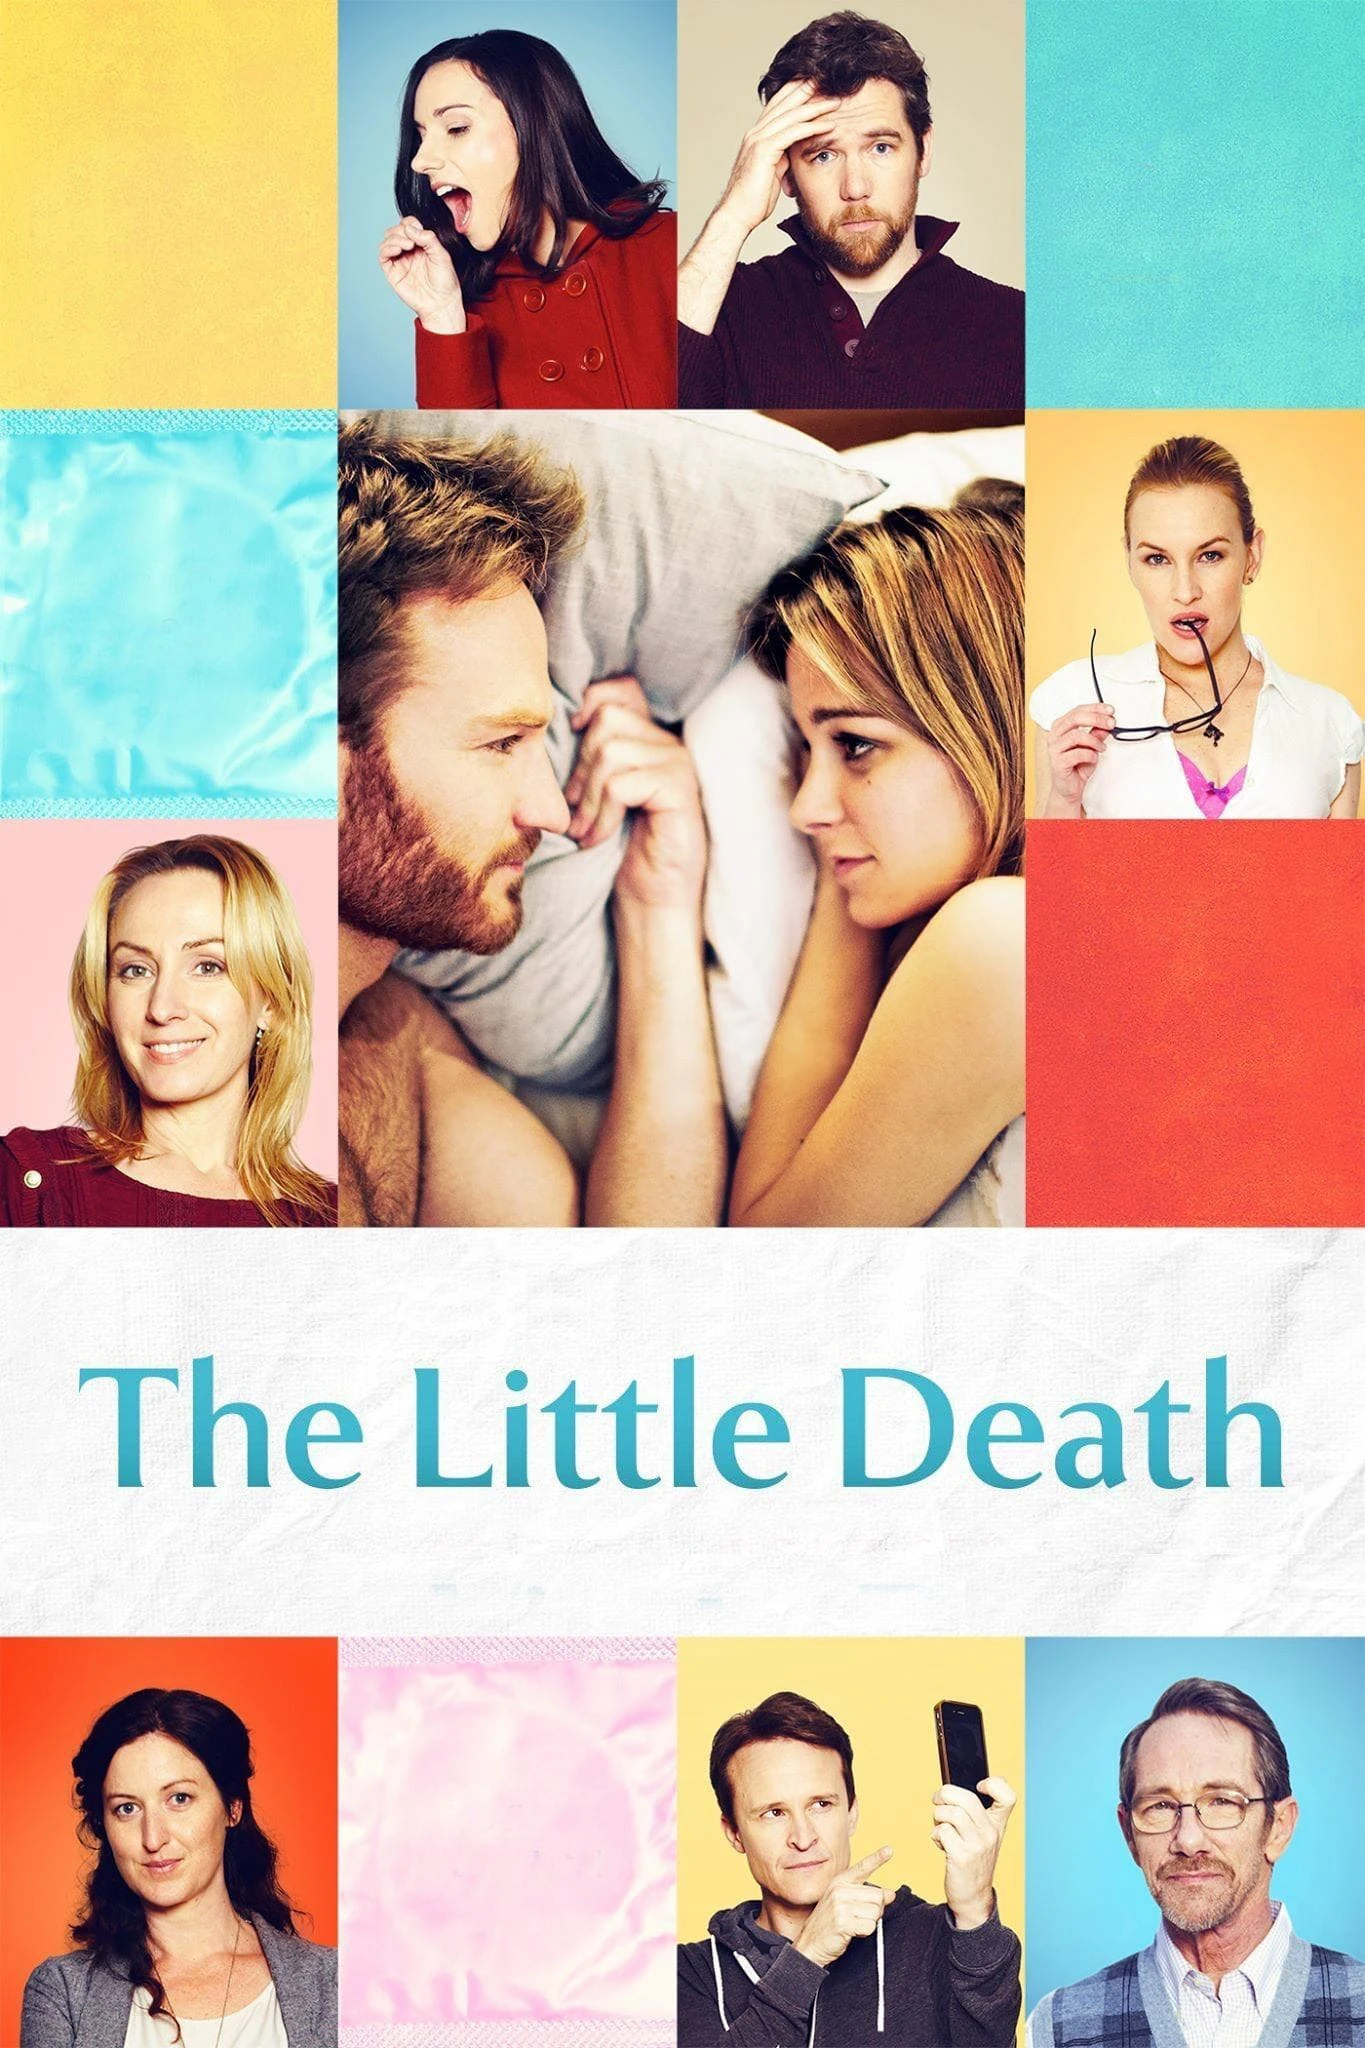 The Little Death | The Little Death (2014)